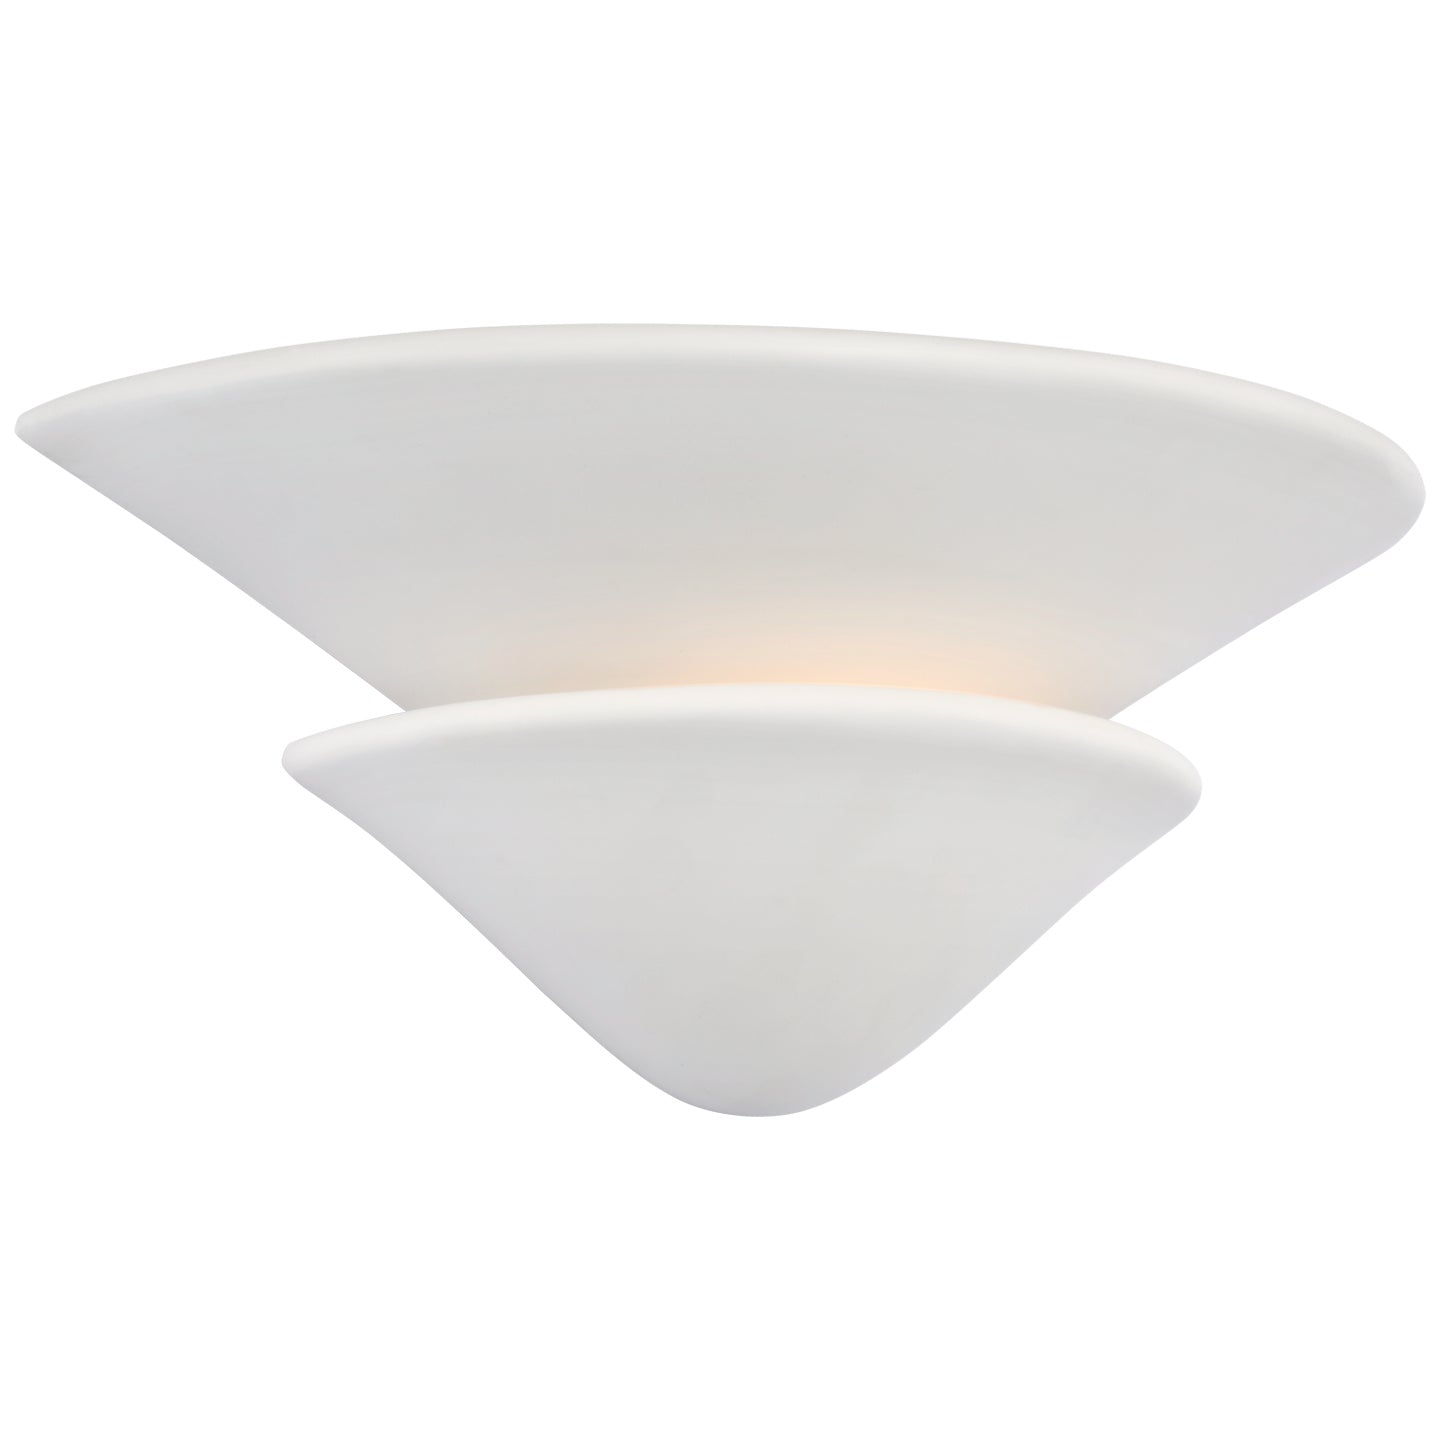 Load image into Gallery viewer, Visual Comfort Signature - ARN 2425PW - LED Wall Sconce - Mollino - Plaster White
